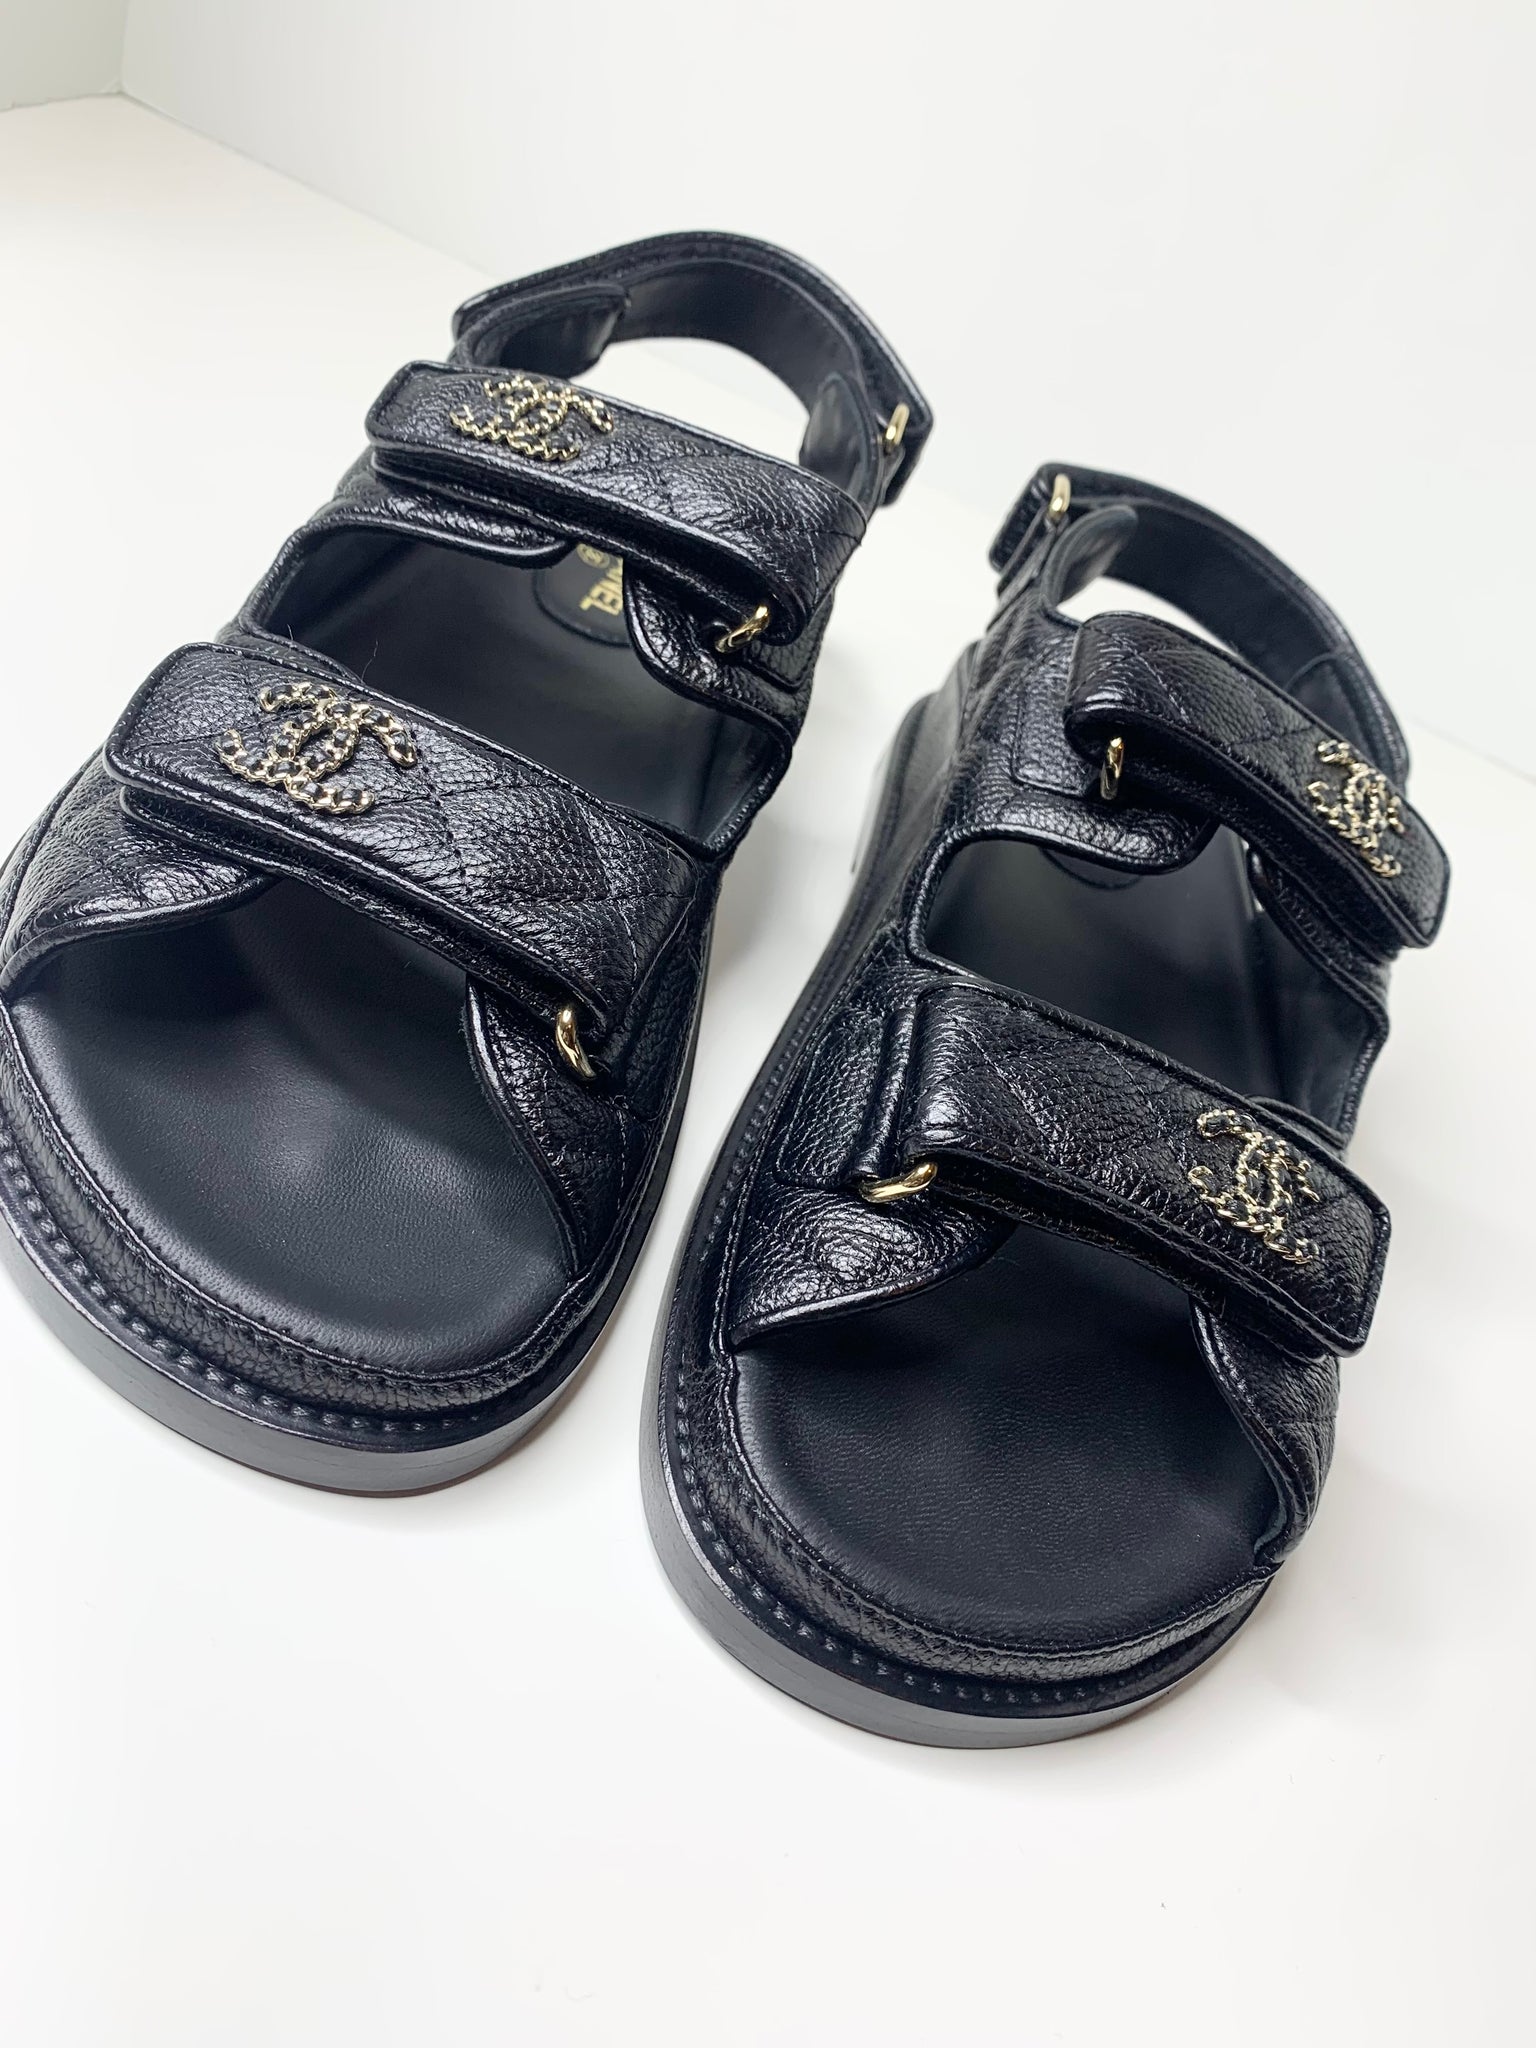 Dad sandals leather sandal Chanel Black size 38.5 EU in Leather